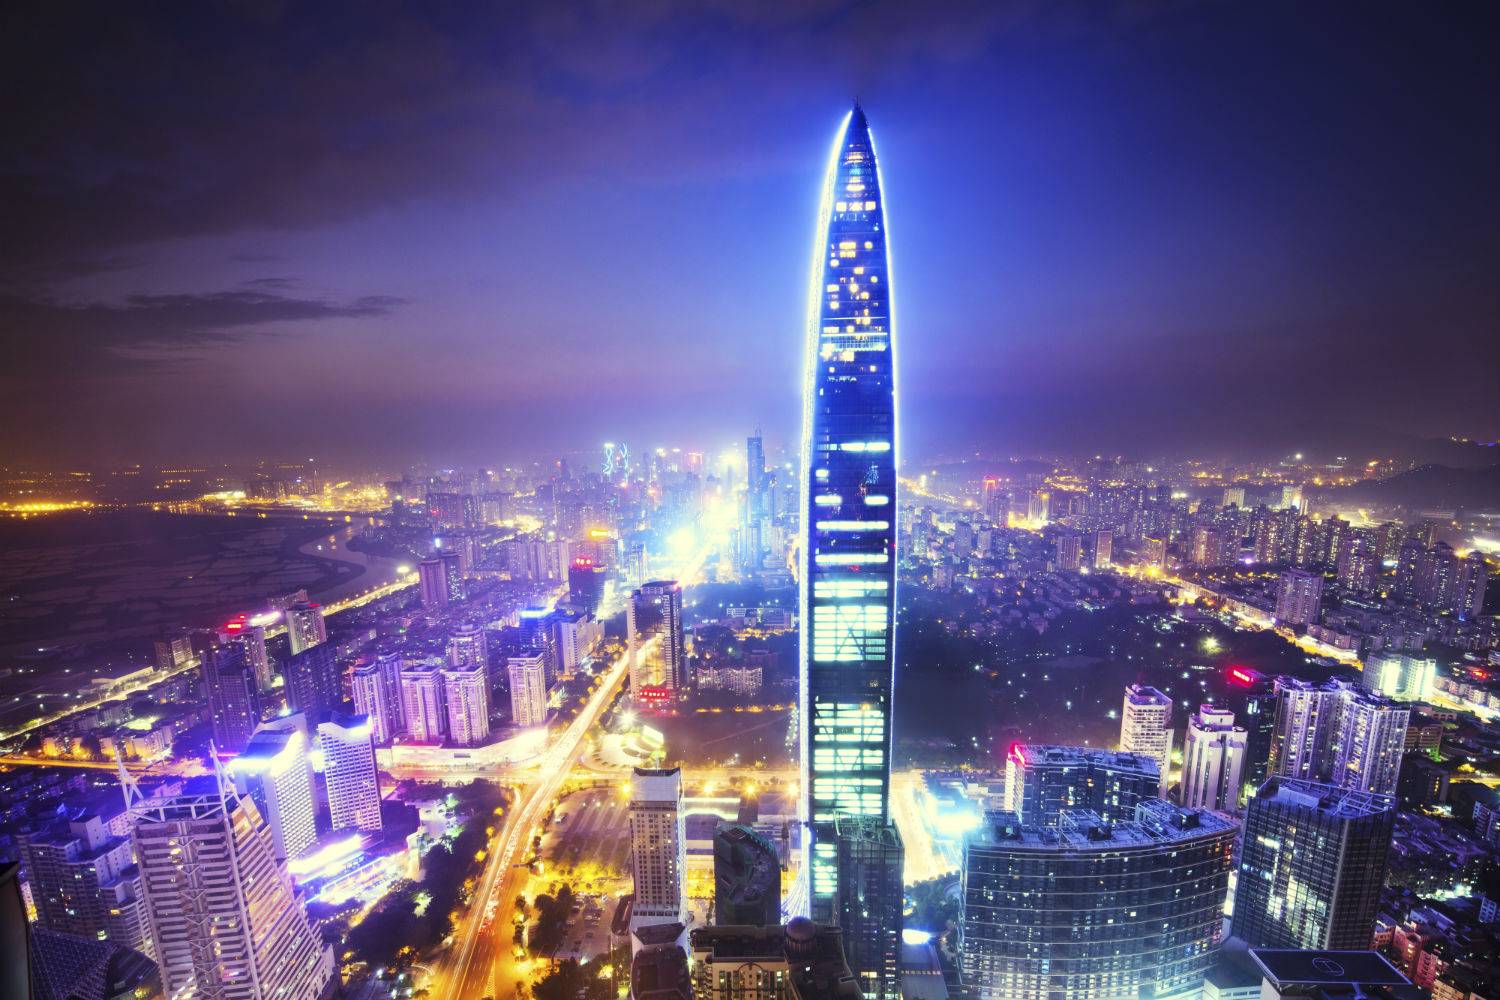 Shenzhen is an ultra-modern city of 14 million people located in southern China approximately 30 miles from Hong Kong. (Getty Images)